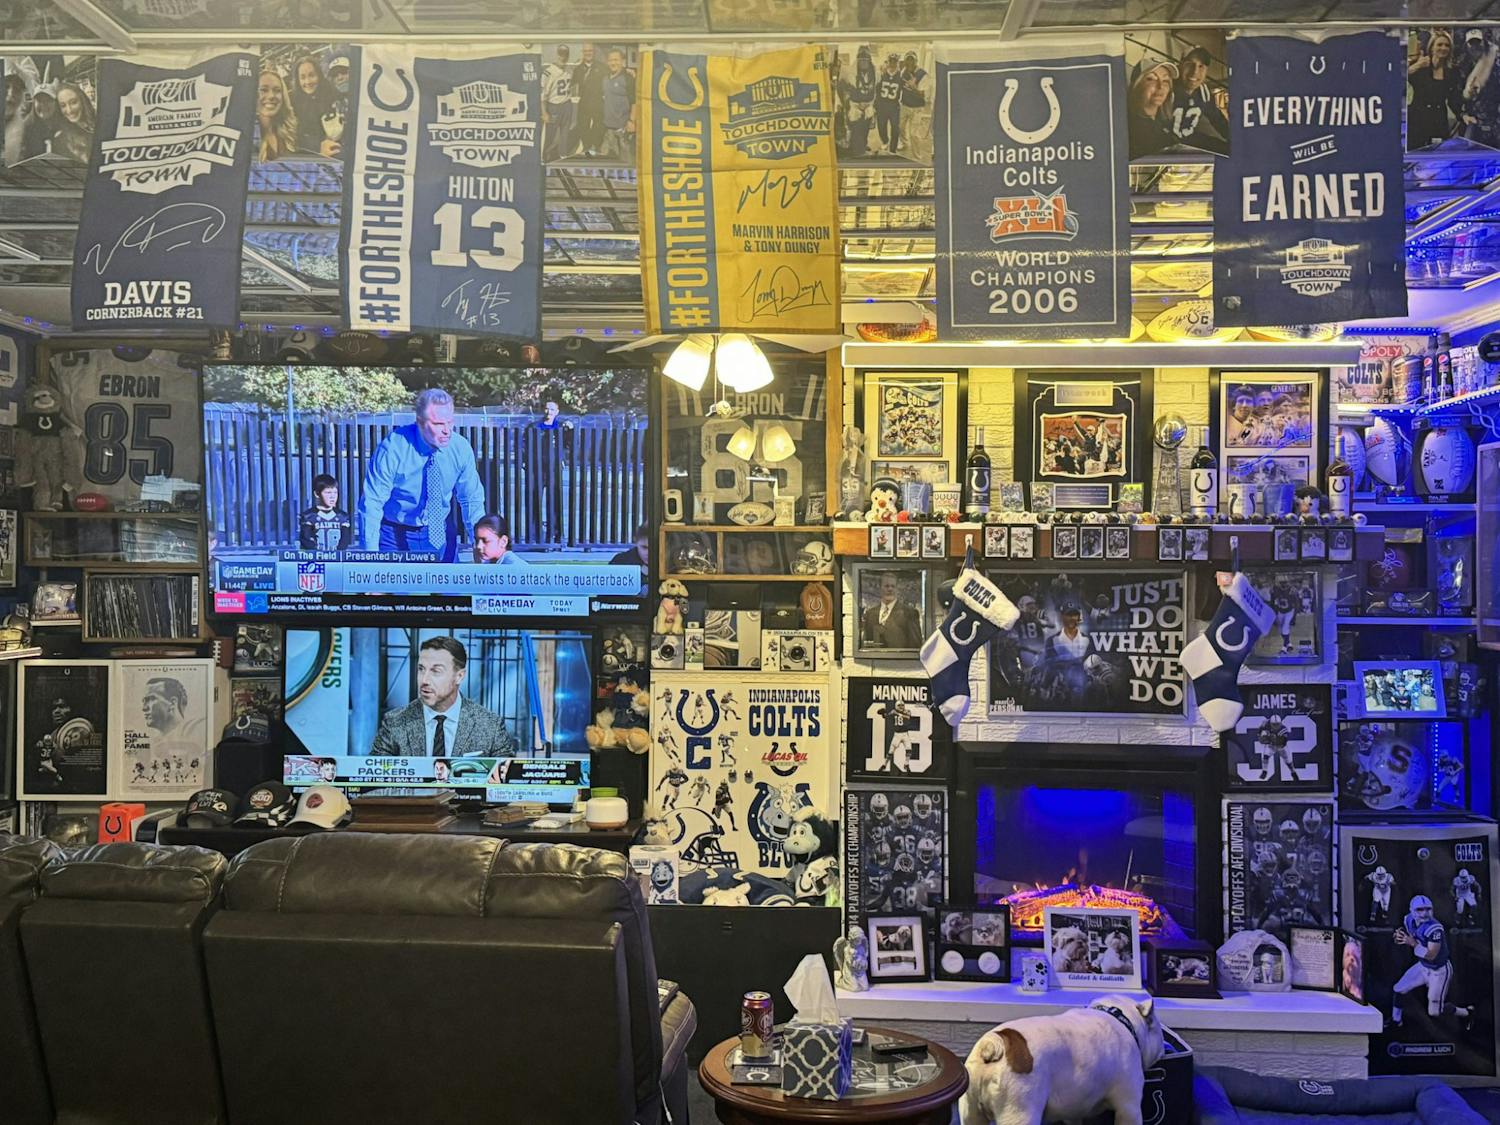 Step inside the 'Colts Cave'